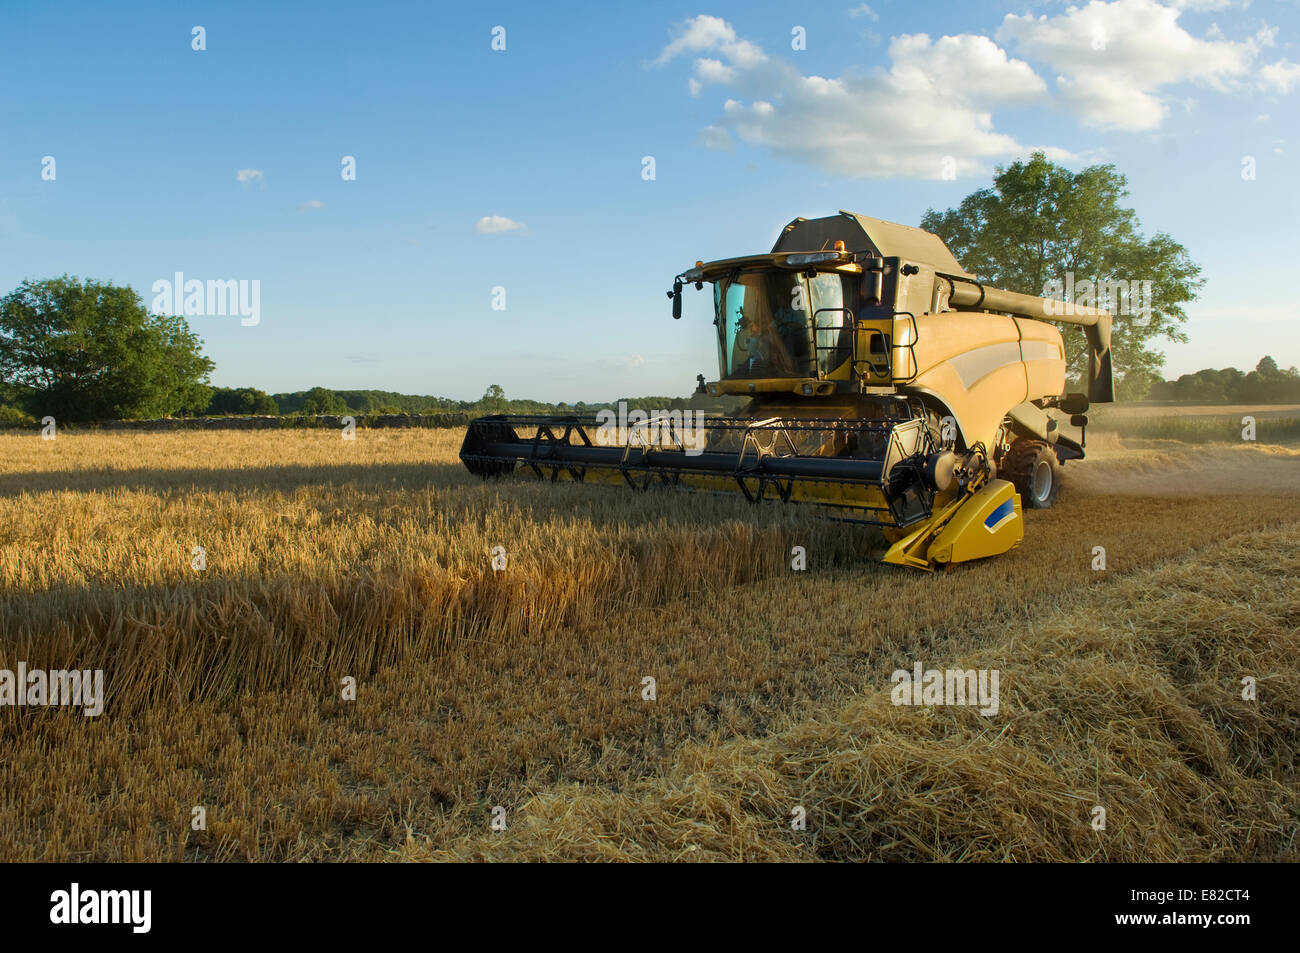 A combine harvester driver working in a field, harvesting a cerial crop. Stock Photo